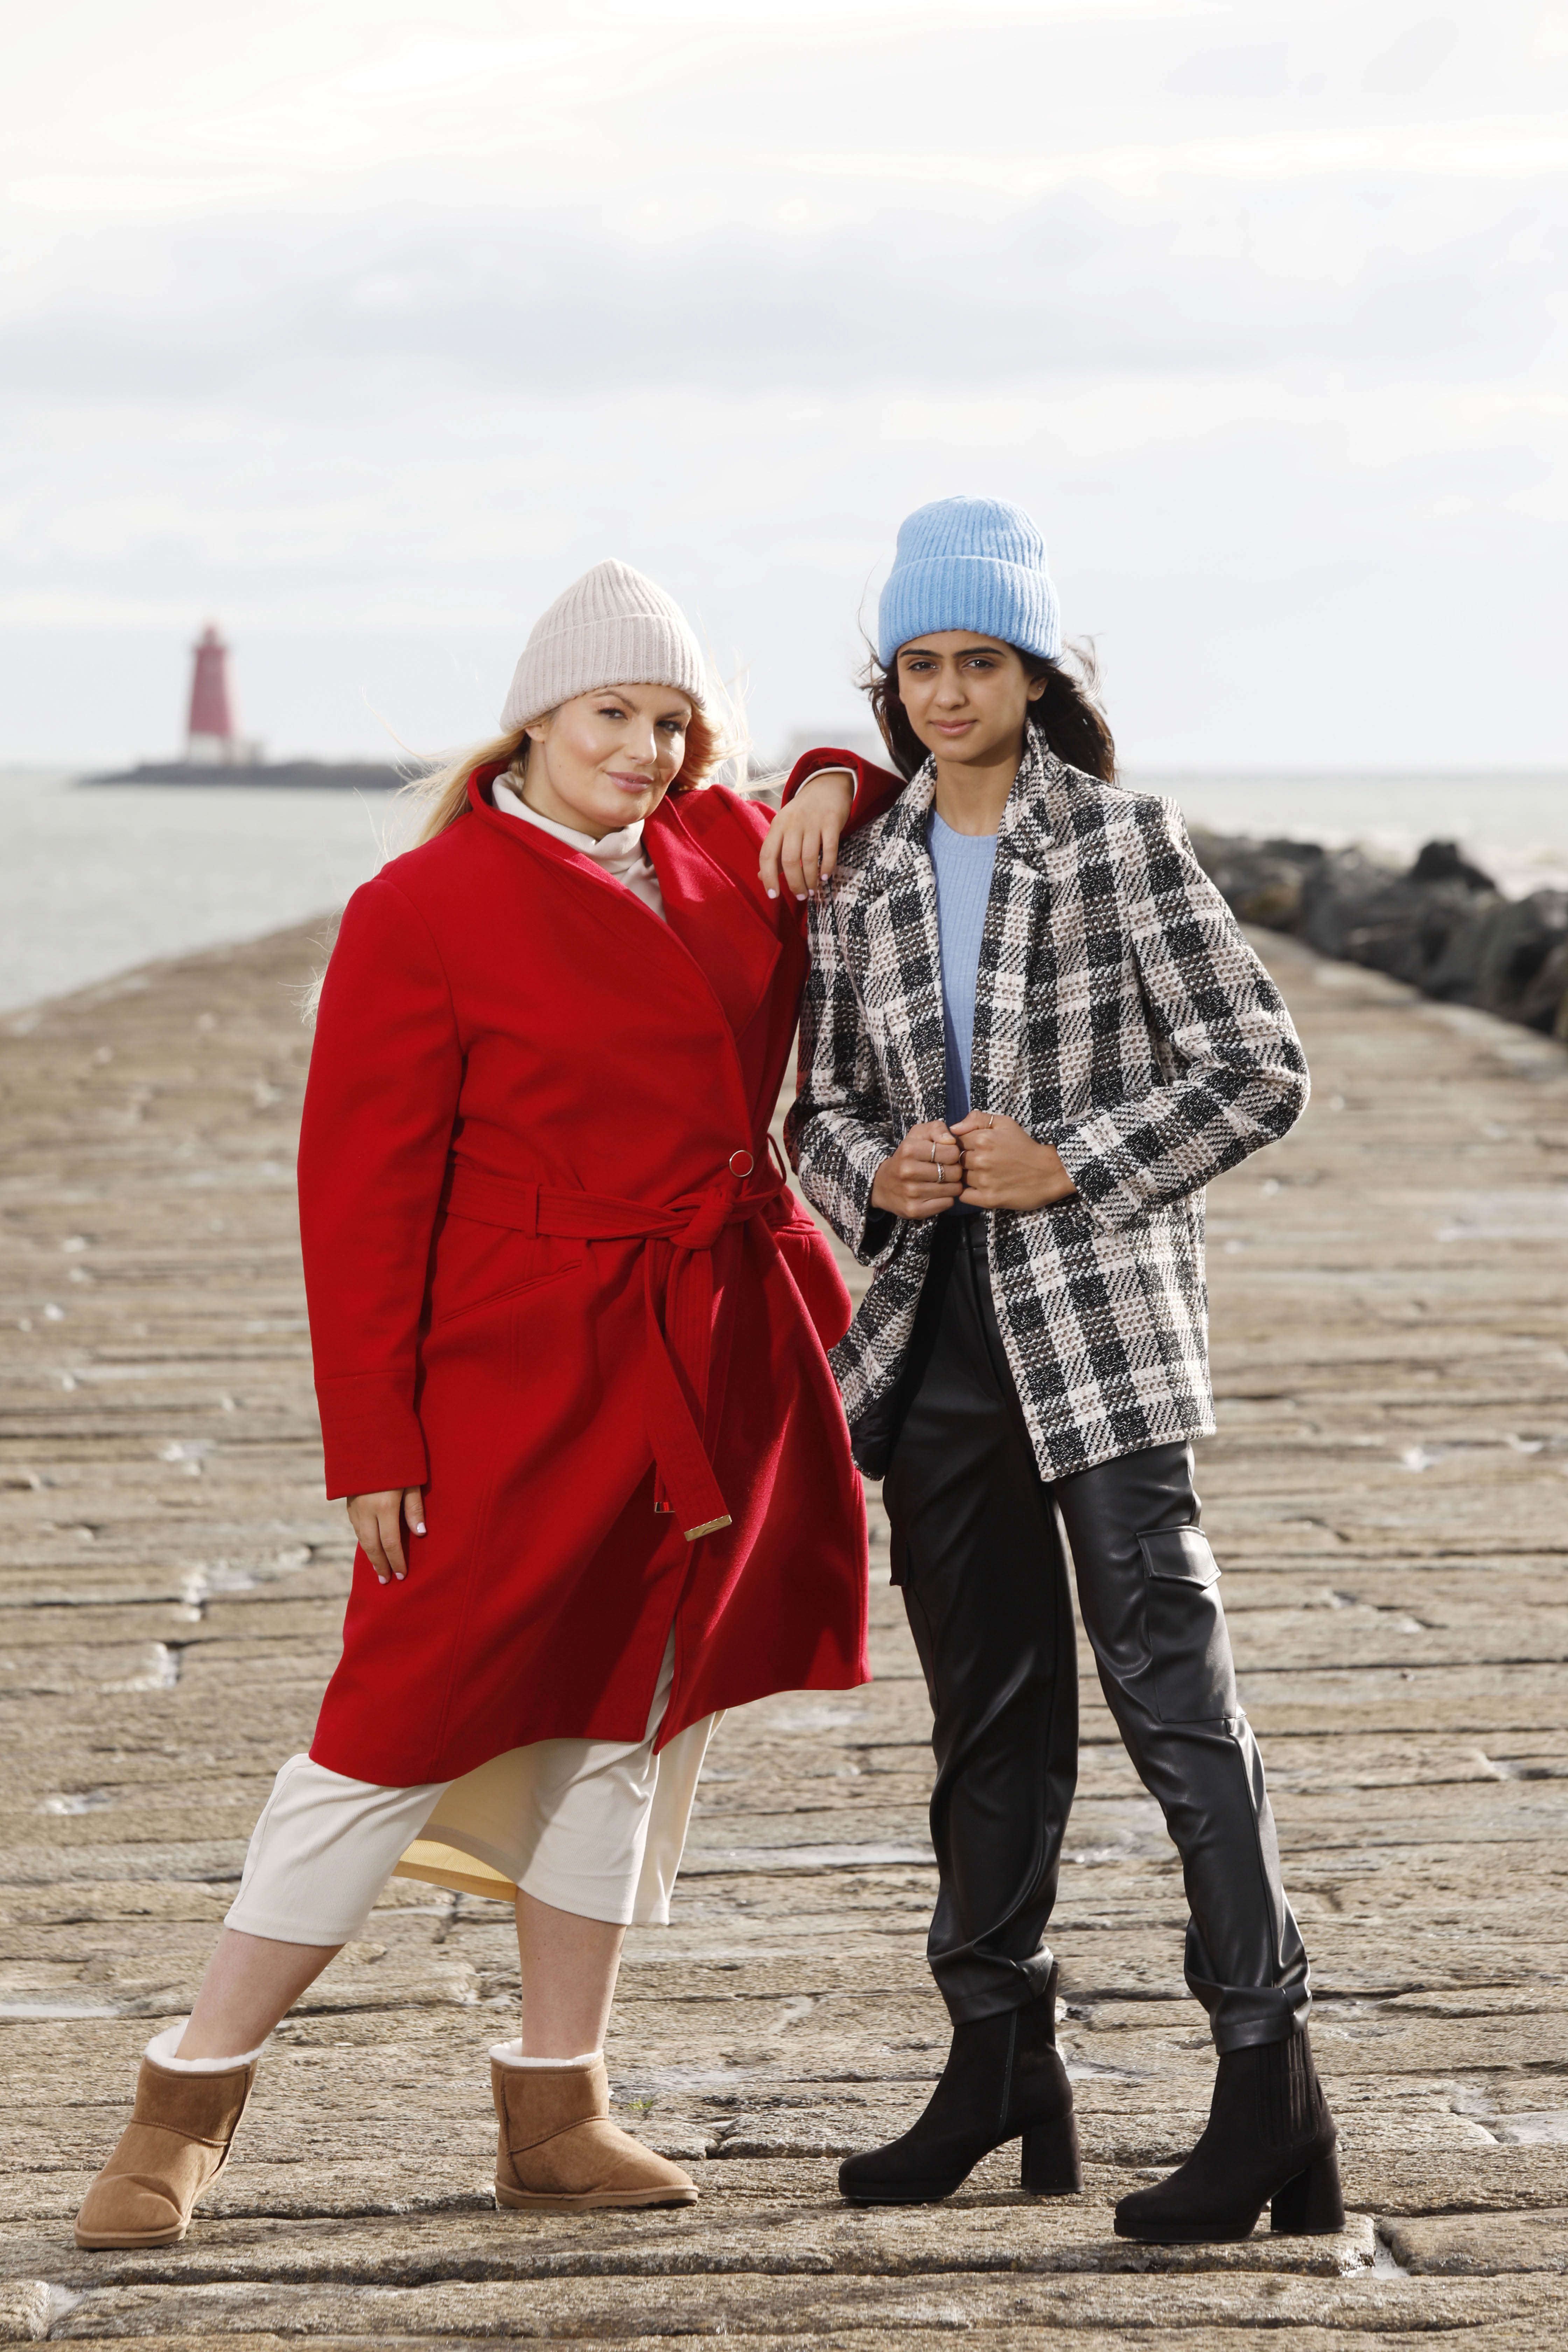 First look: F&F at Tesco unveils affordable autumn/winter capsule collection